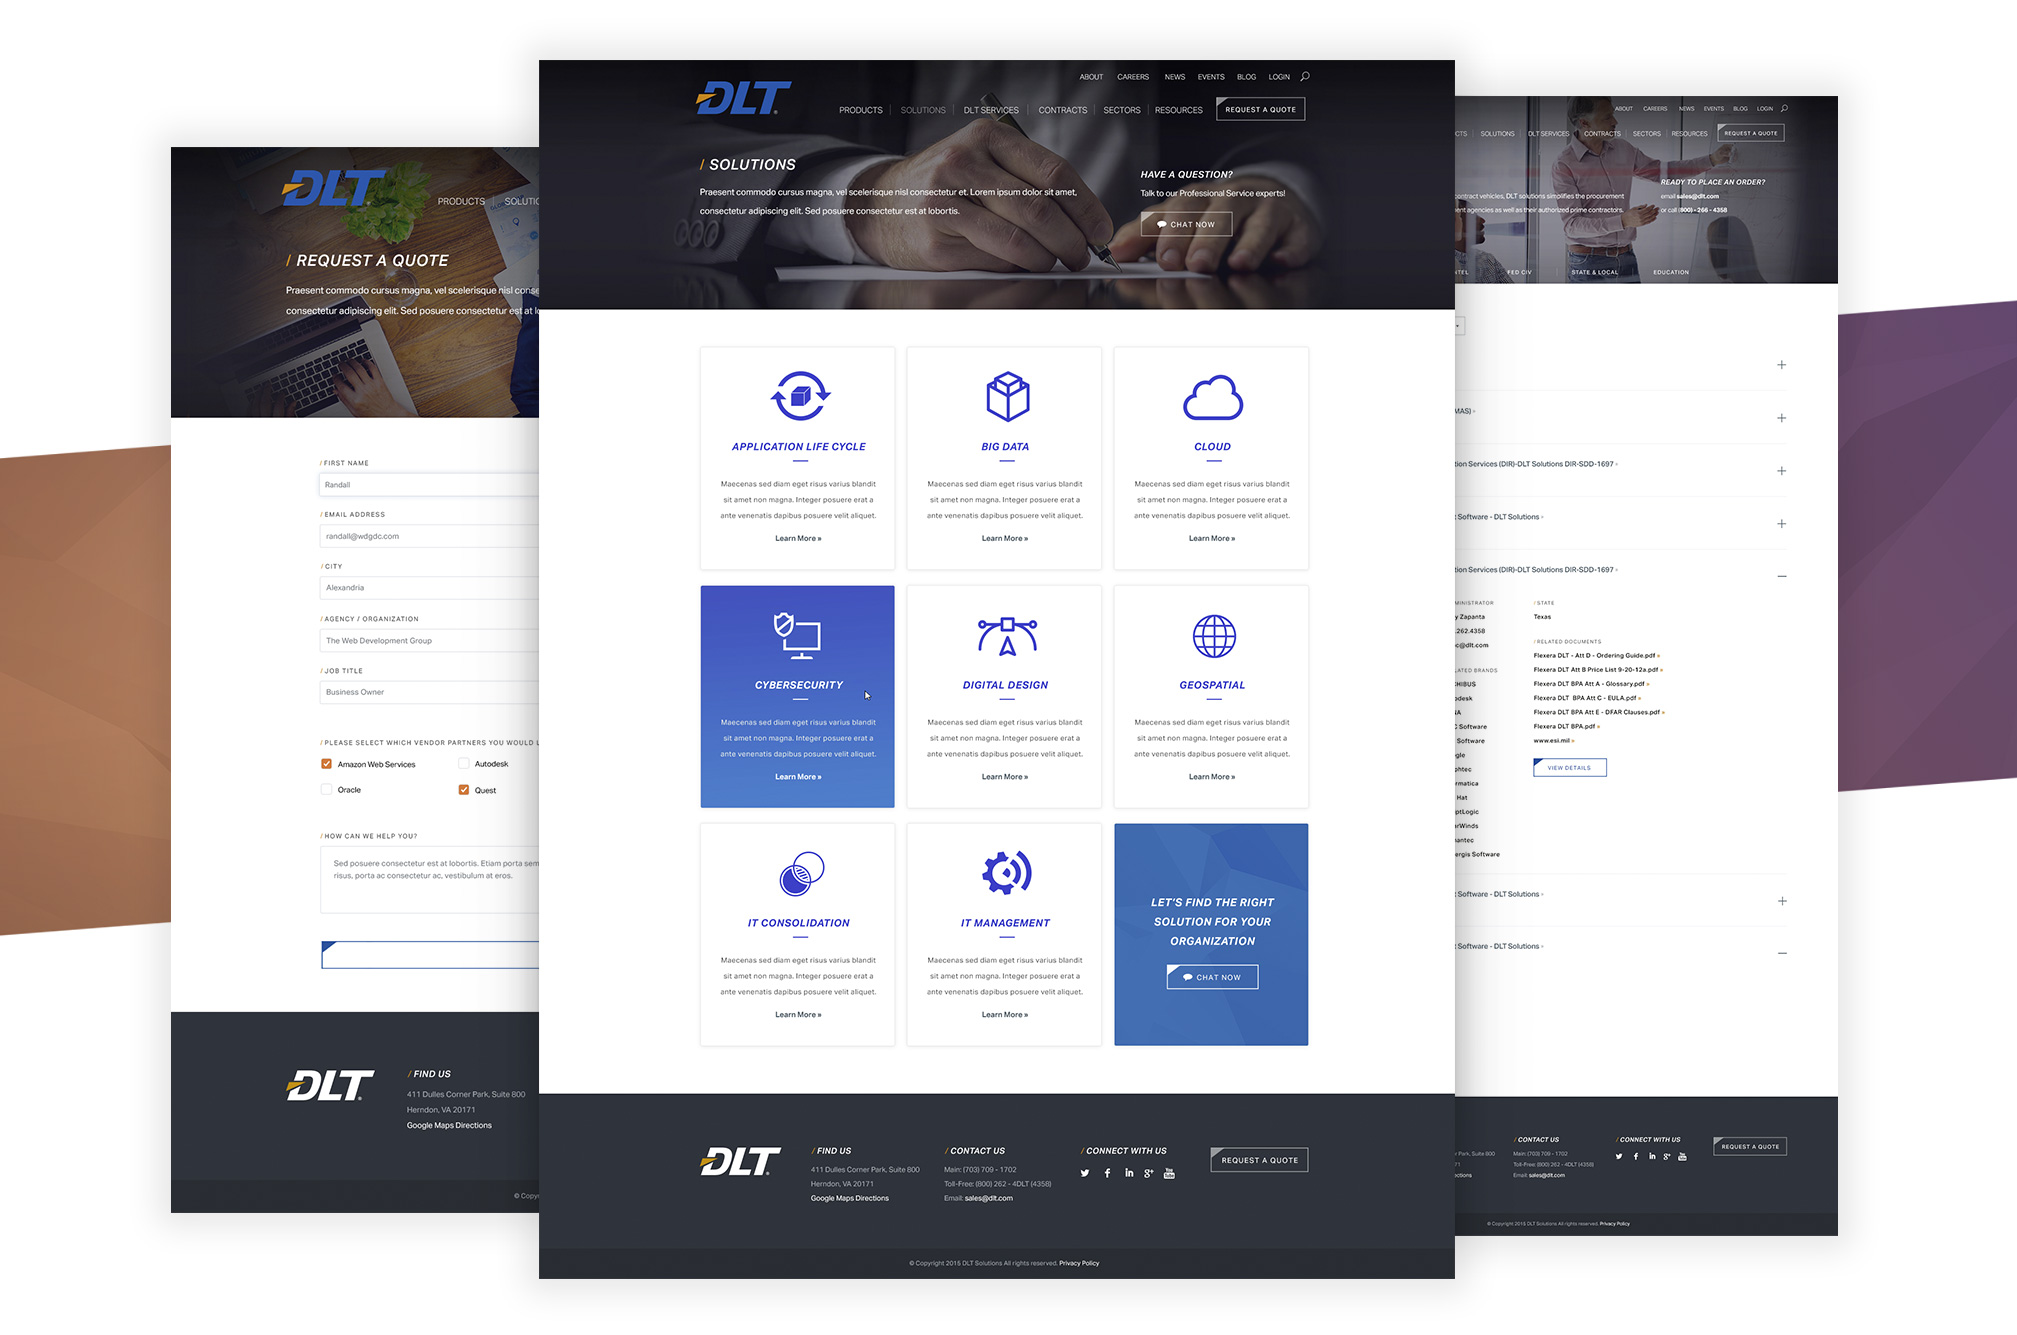 Design comps for DLT, a business to government IT company